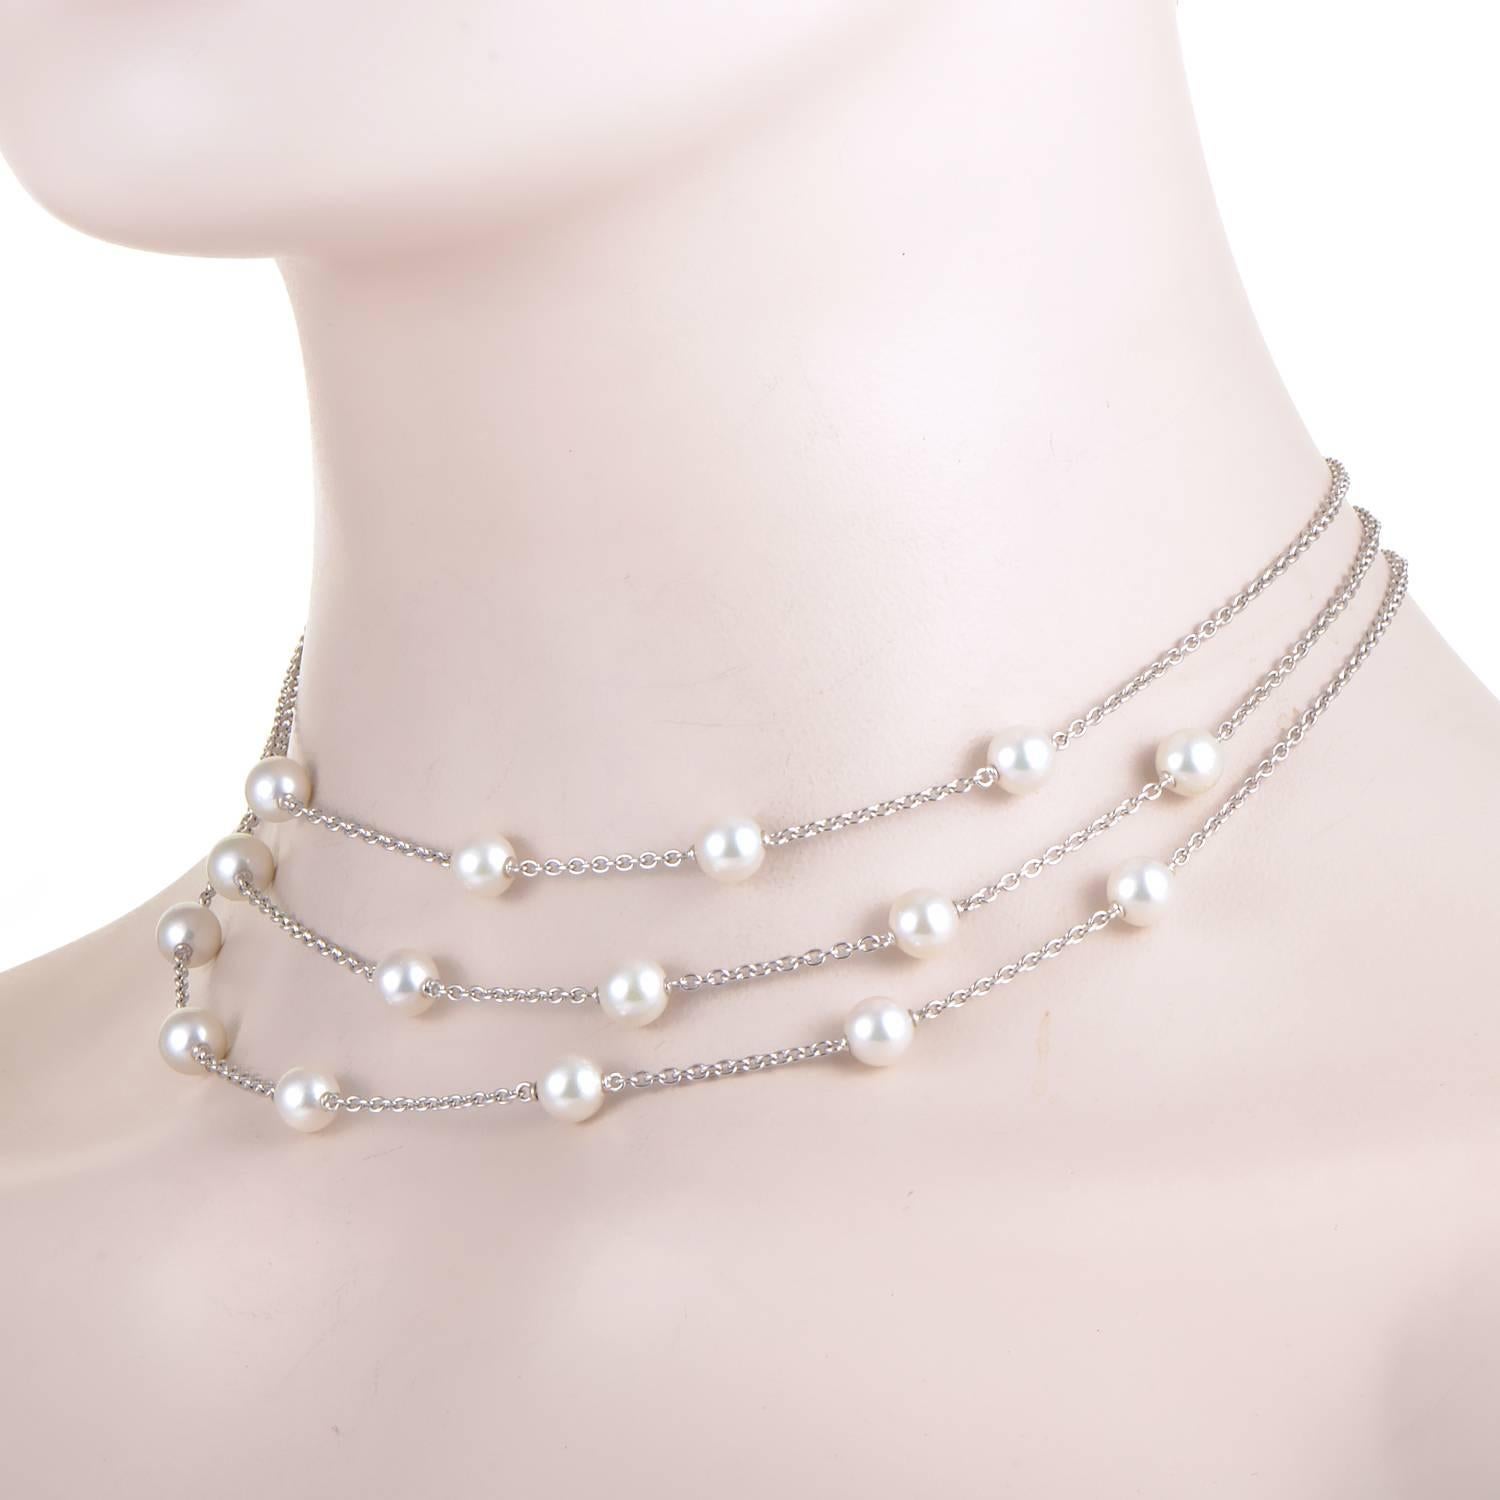 Perfectly in keeping with the elegantly bright tone of splendid 18K white gold and matching the tenderness of the slim chain, the marvelous pearls lend their pleasant nuance and delightful shape to this exceptional necklace from Mikimoto.
Pearl